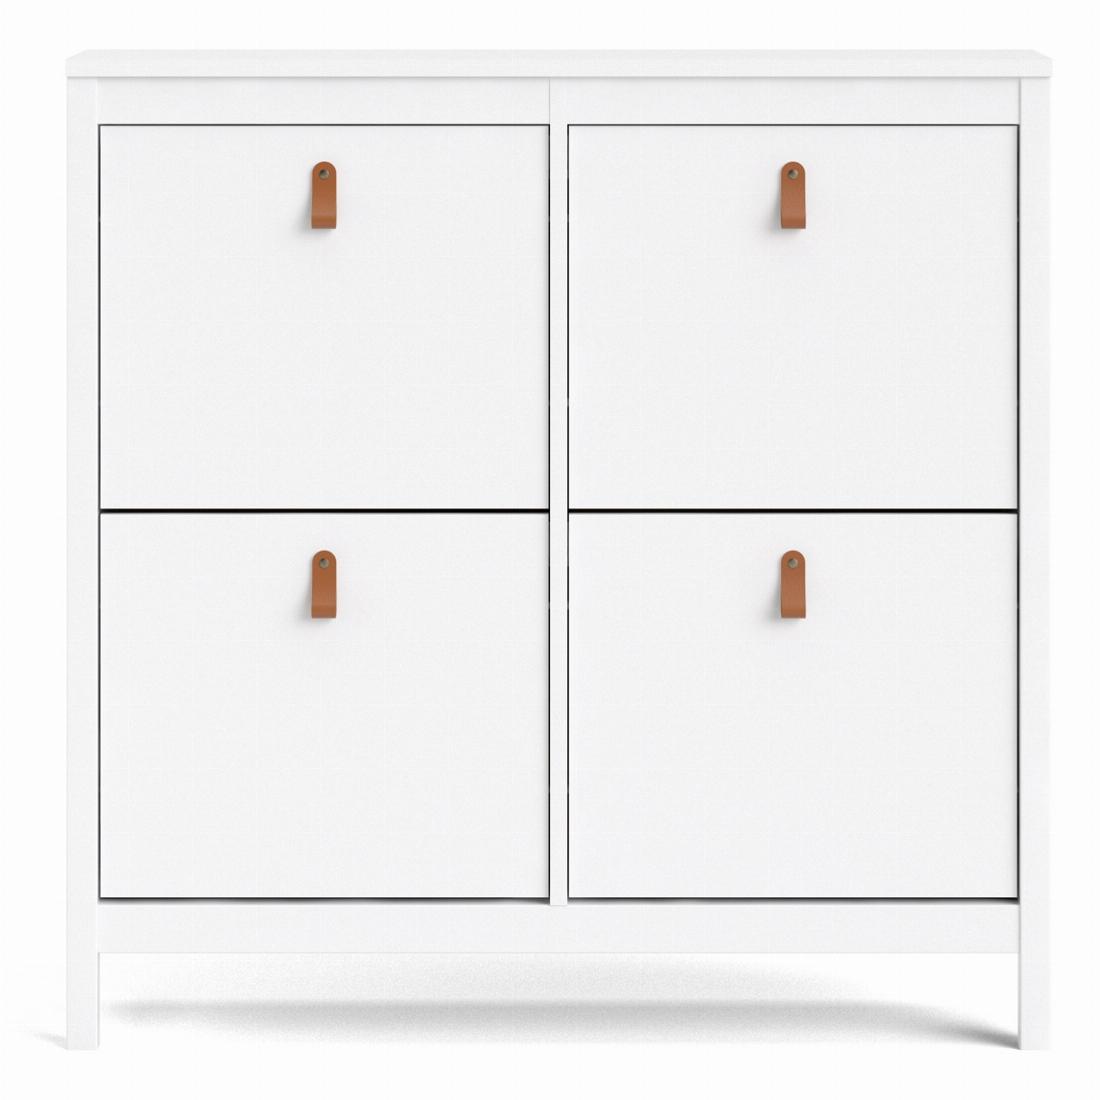 Barcelona Shoe cabinet 4 compartments in White